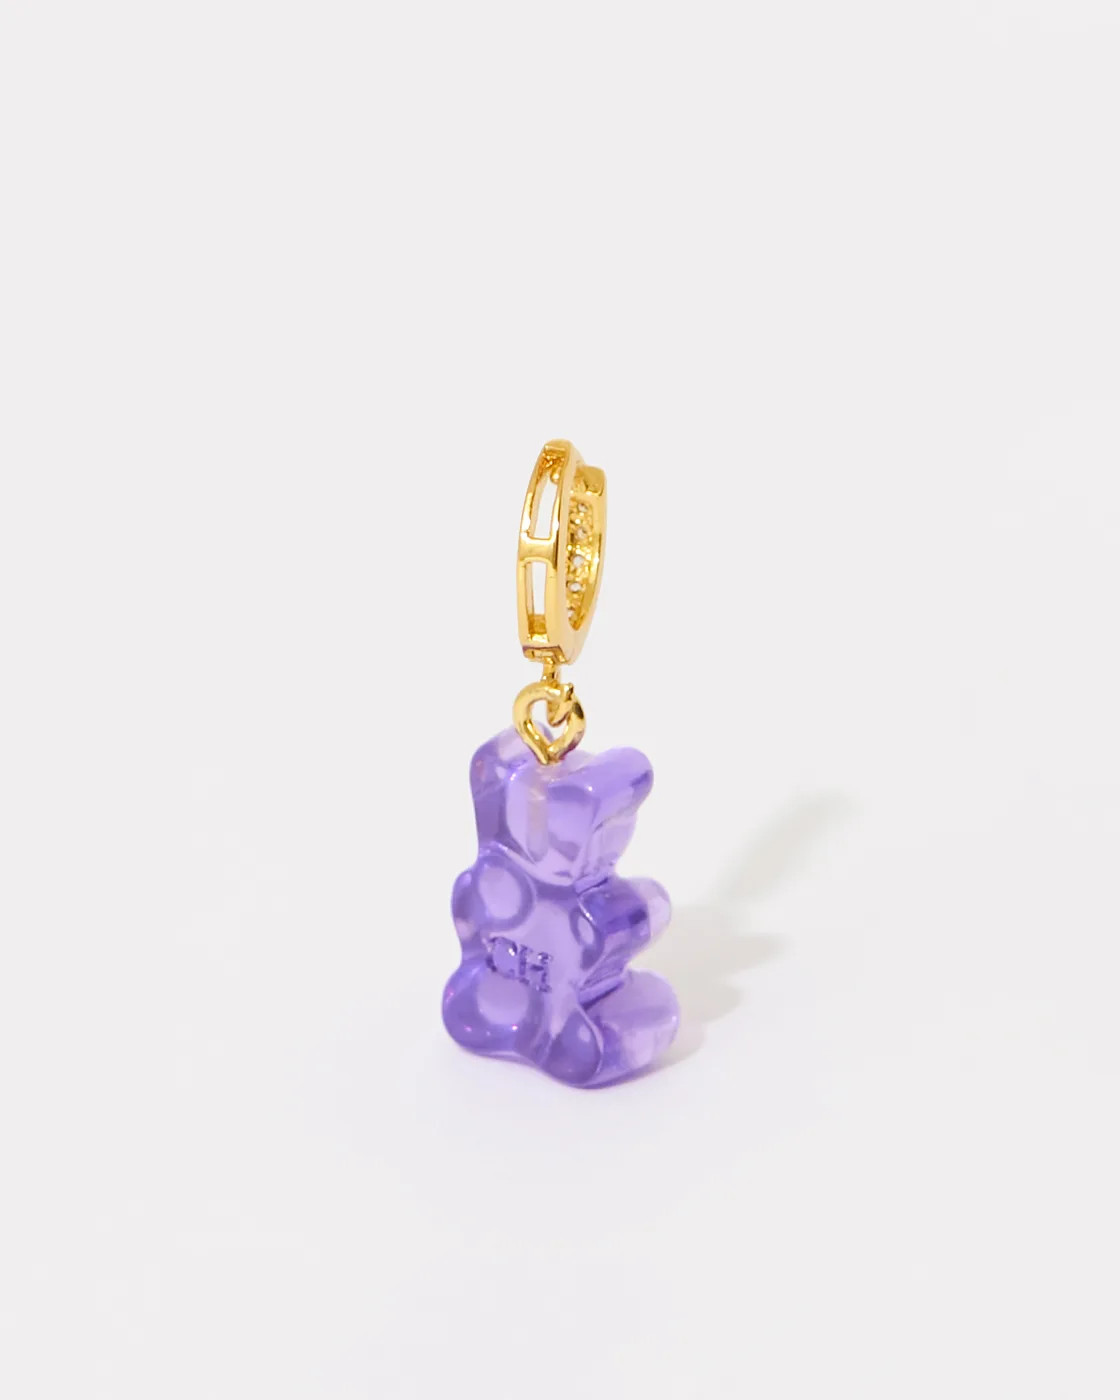 Nostalgia Bear Gold-Plated, Resin and Cubic Zirconia Single Hoop Earring - Plum